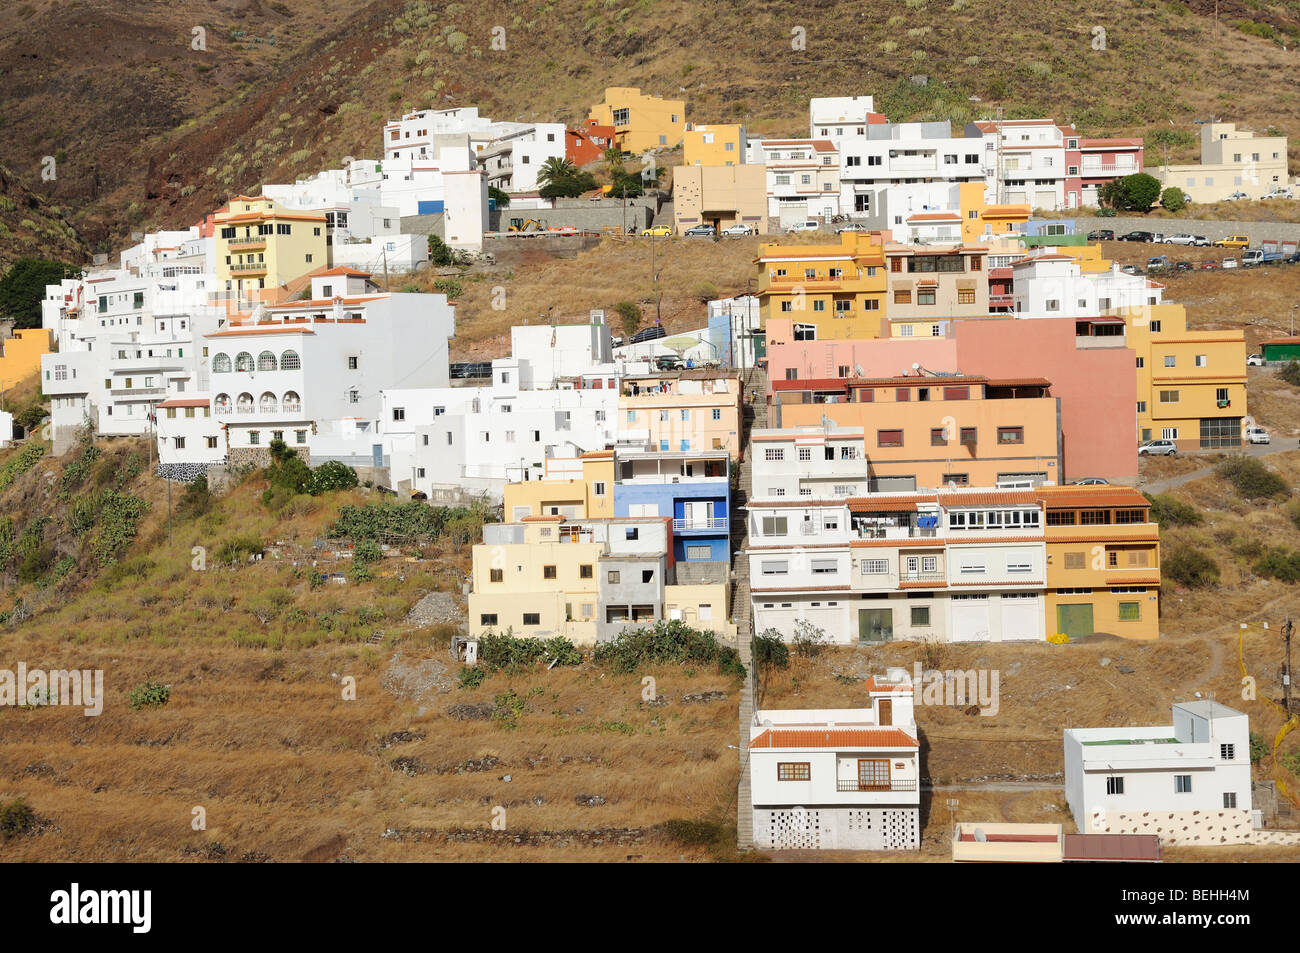 Village in the Mountains. Canary Island Tenerife, Spain Stock Photo